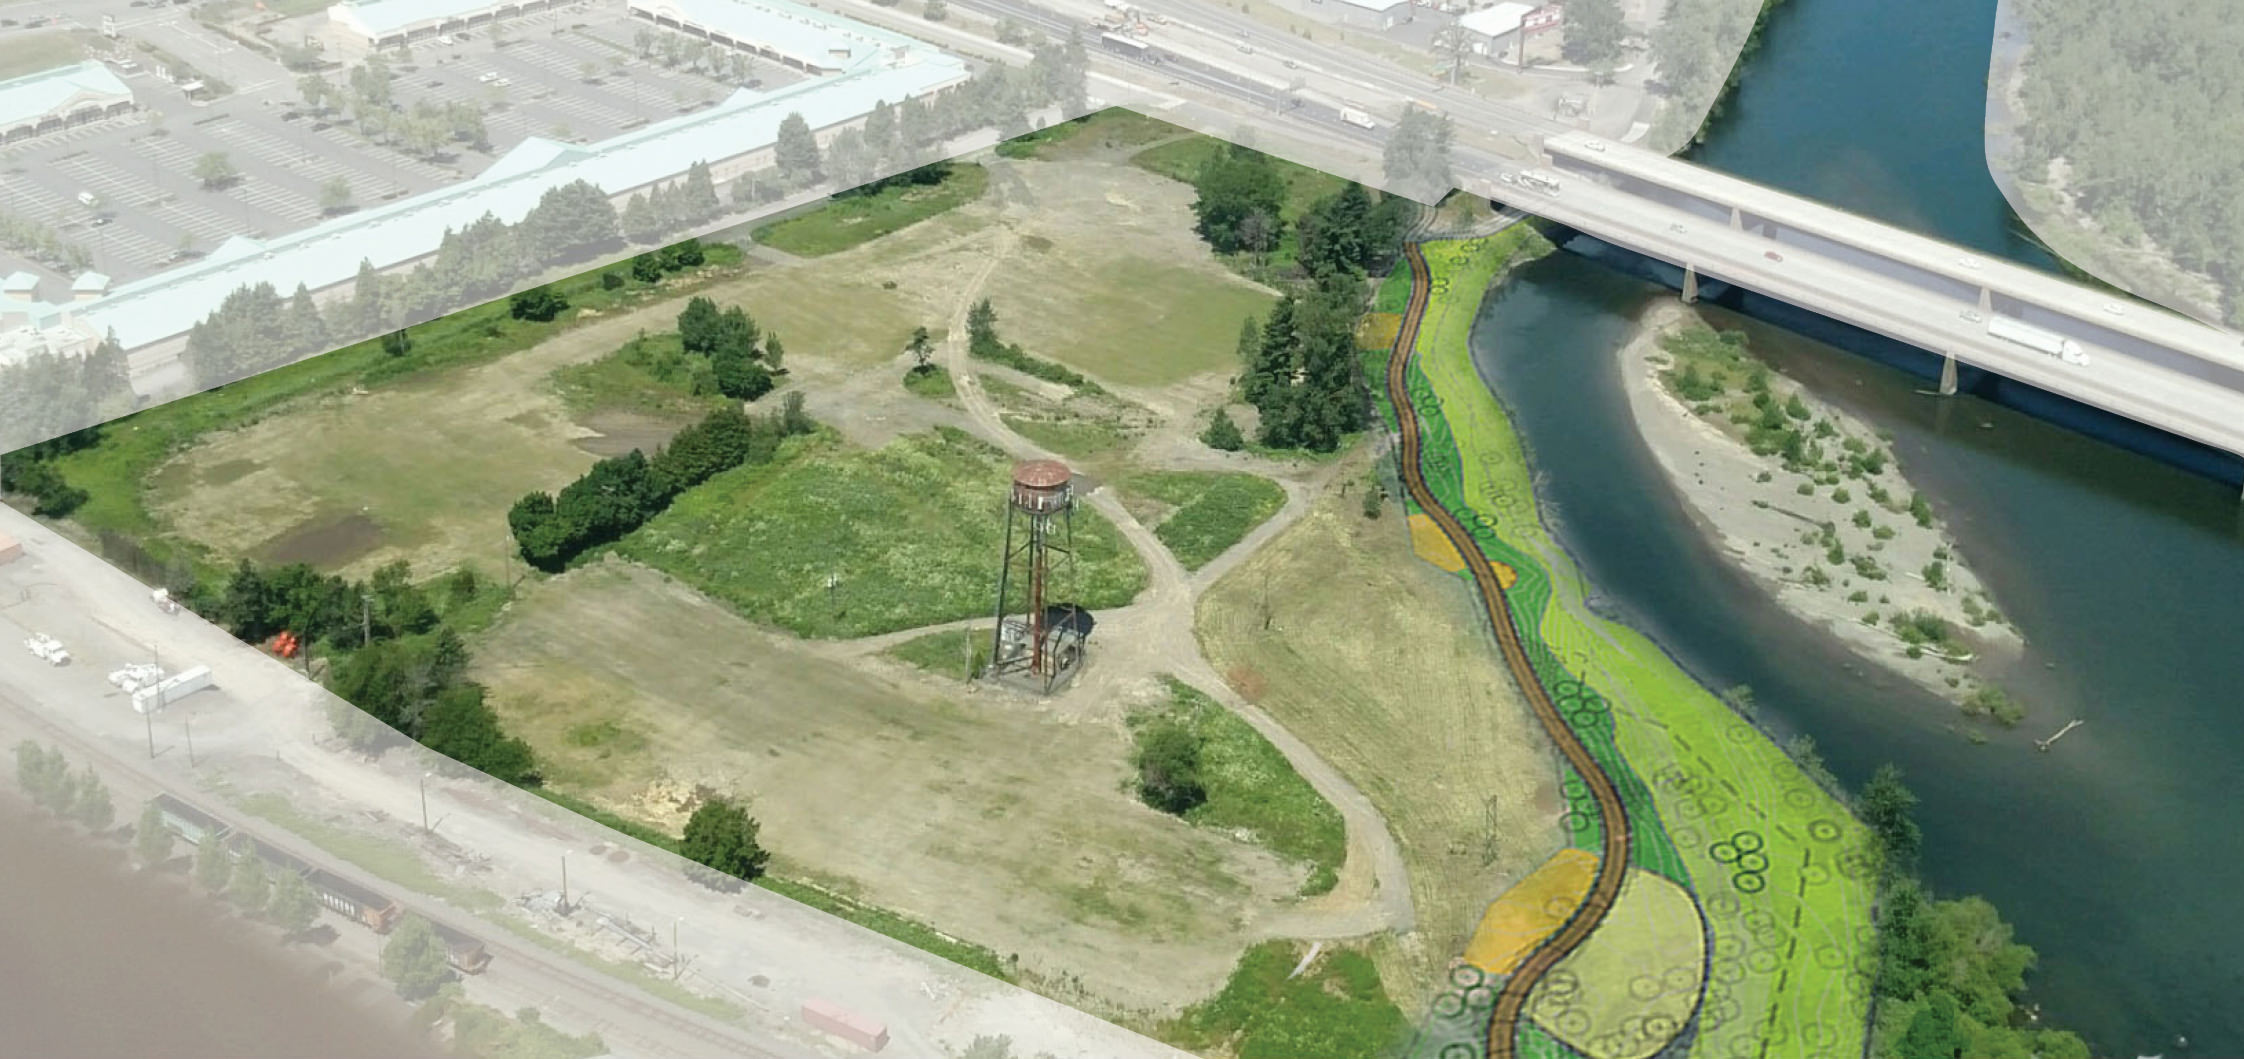 Artist rendering of the Sandy River trail